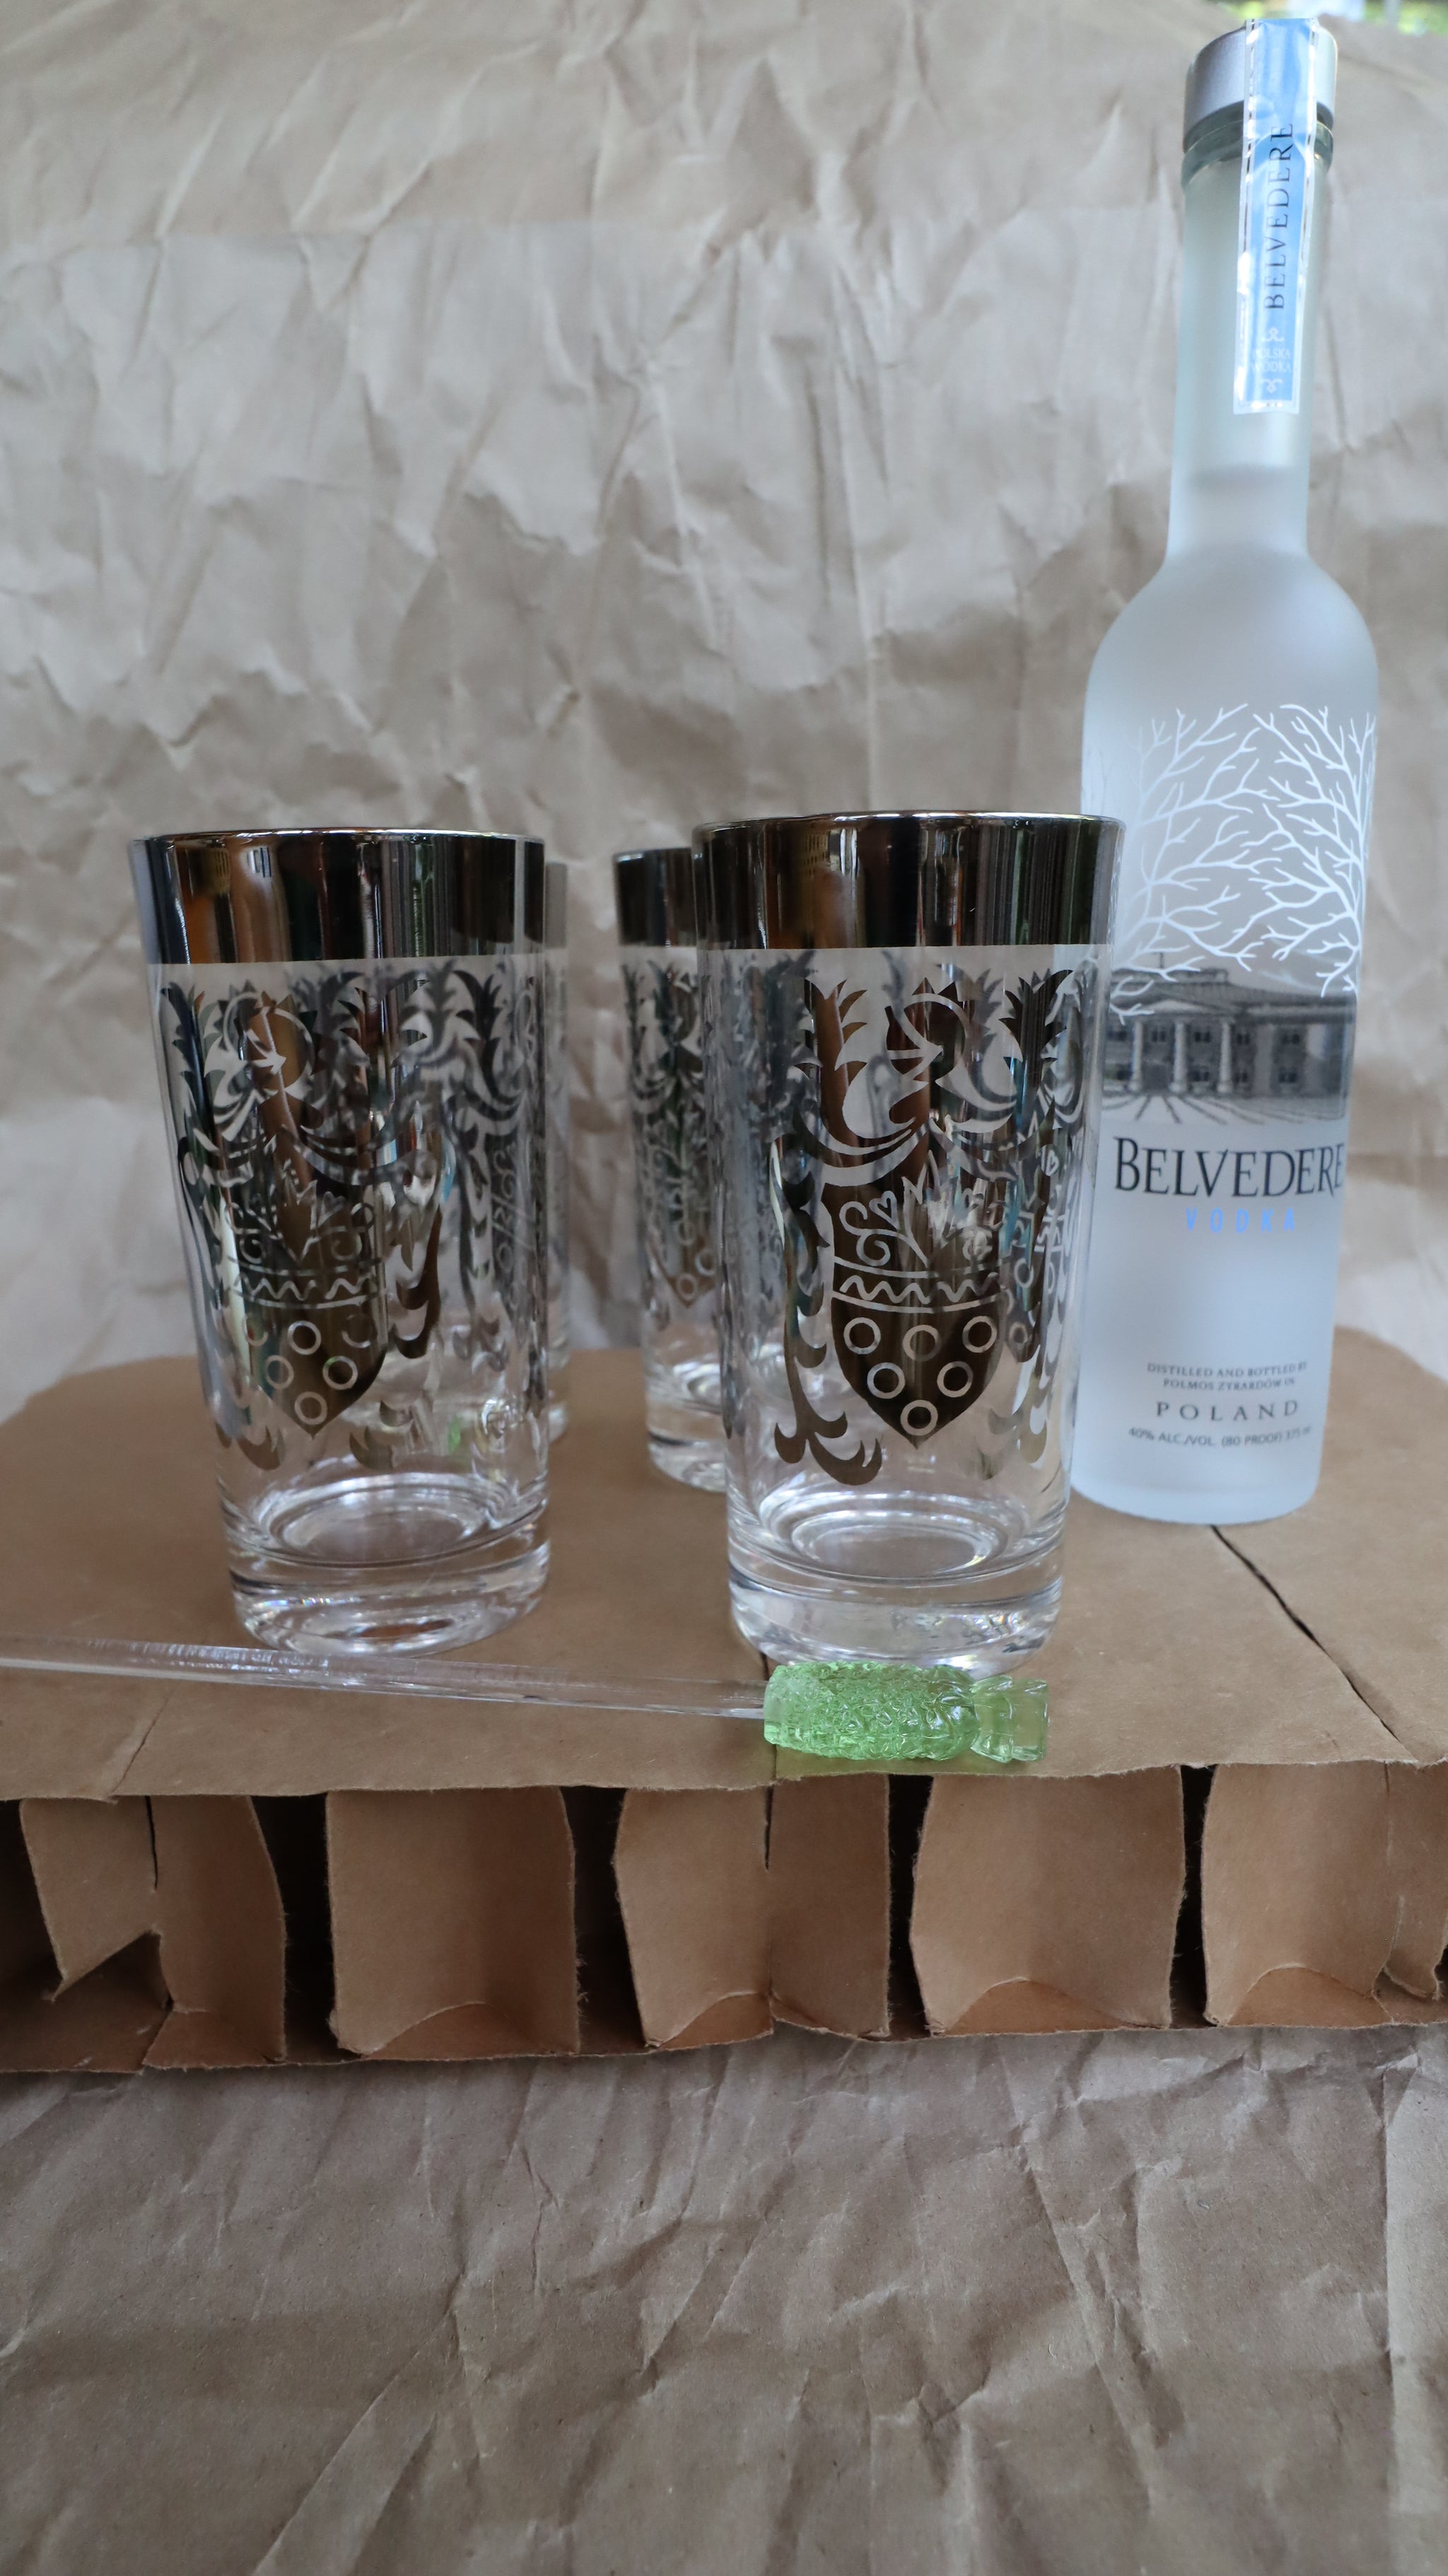 1960s Kimiko Silvercrest Knight Coat of Arms Highball Glasses - Set of 4